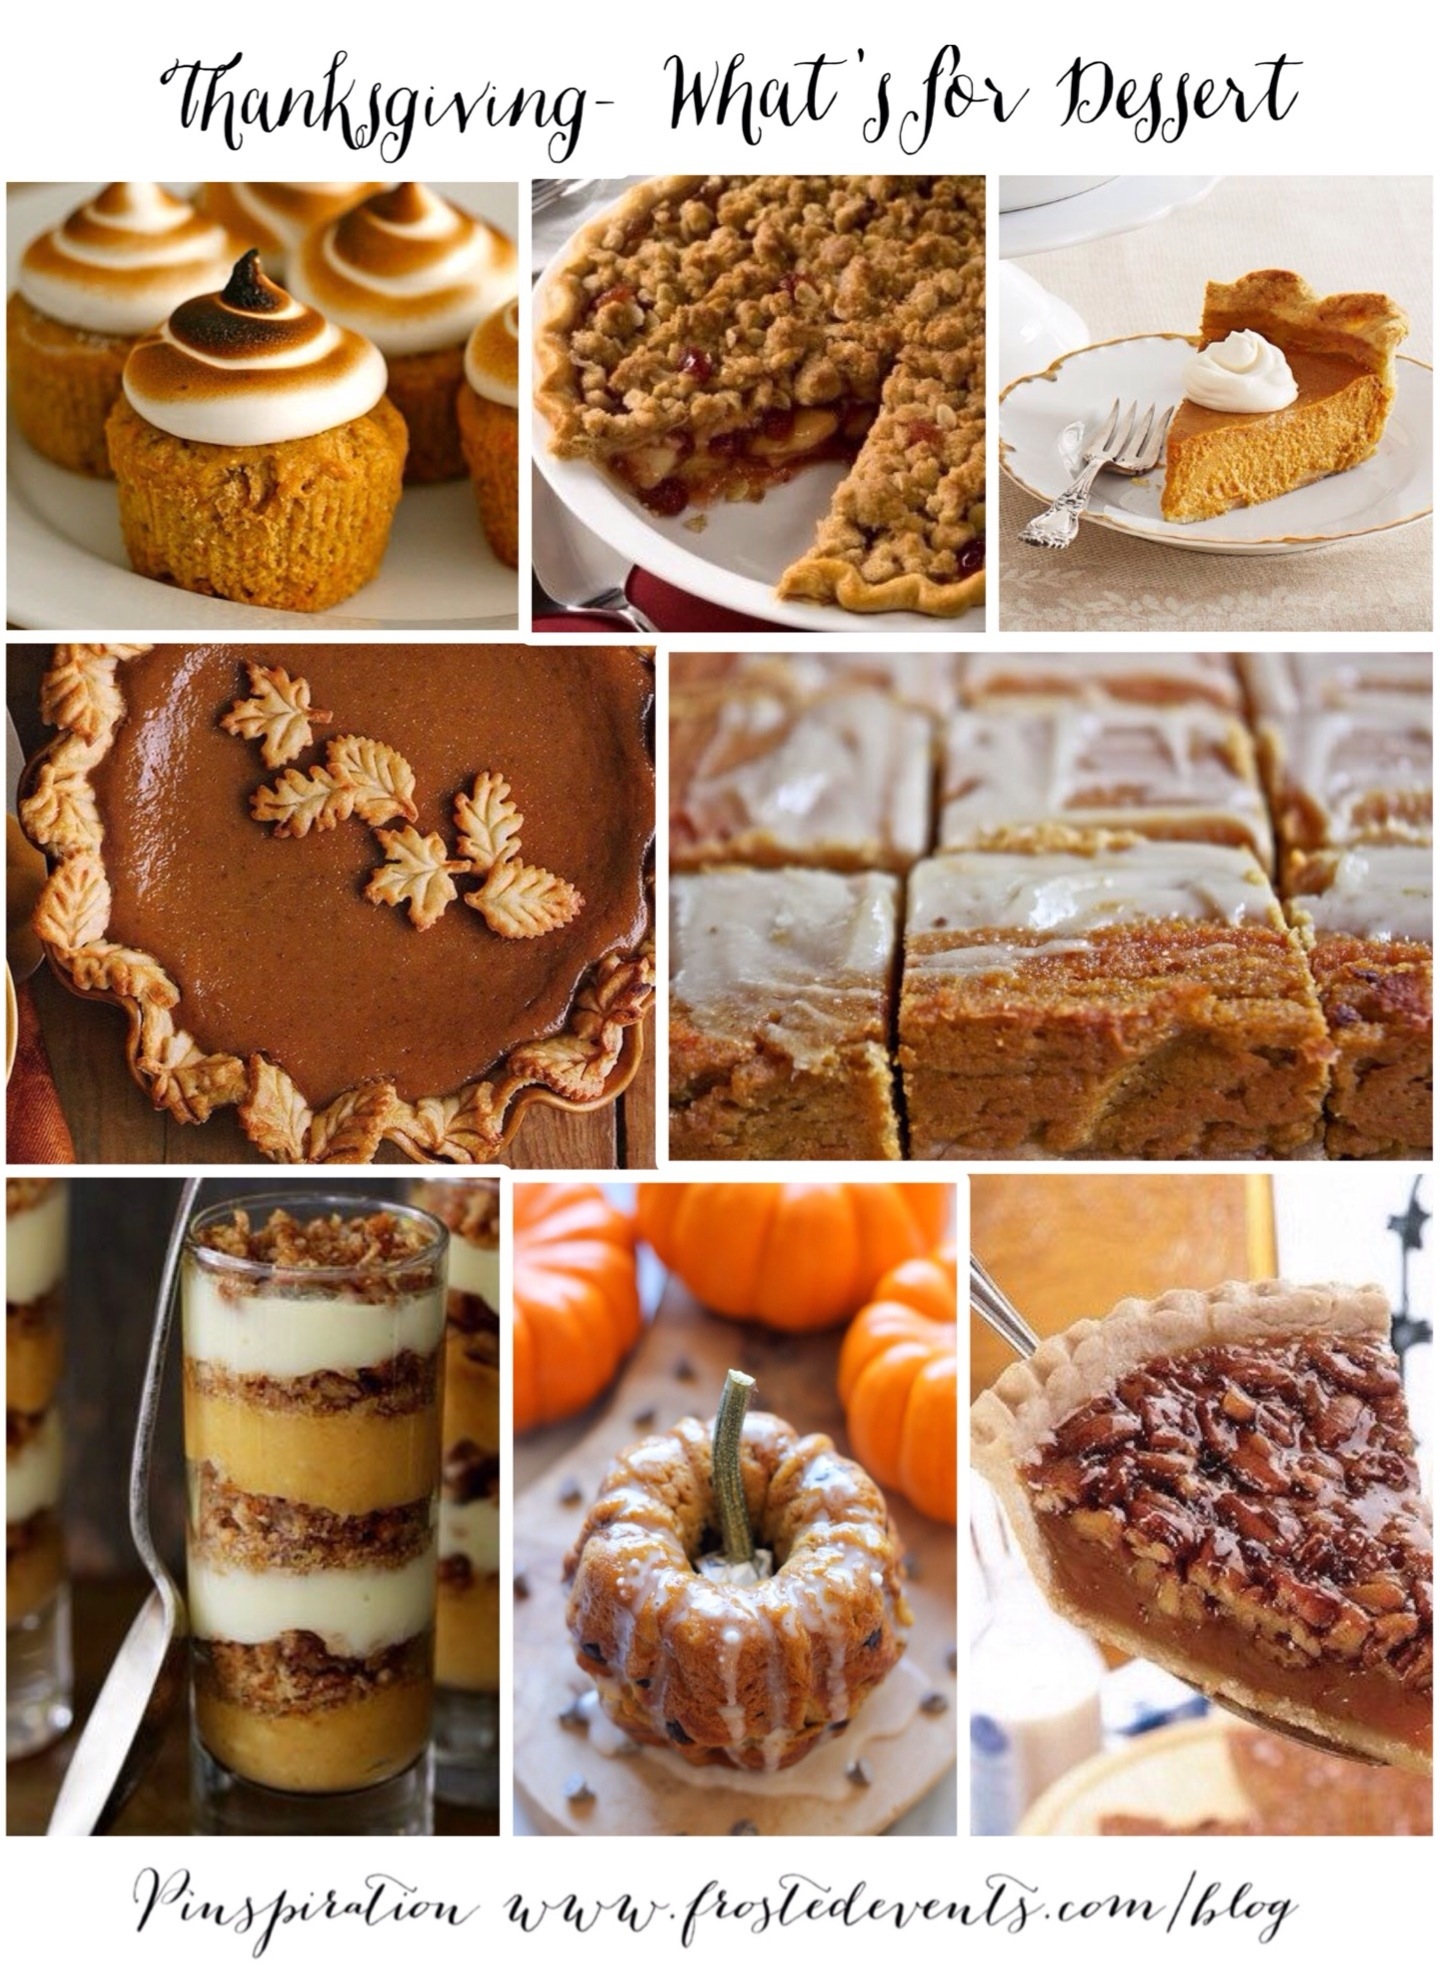 Thanksgiving Dessert Recipe Ideas and Inspiration www.frostedevents.com